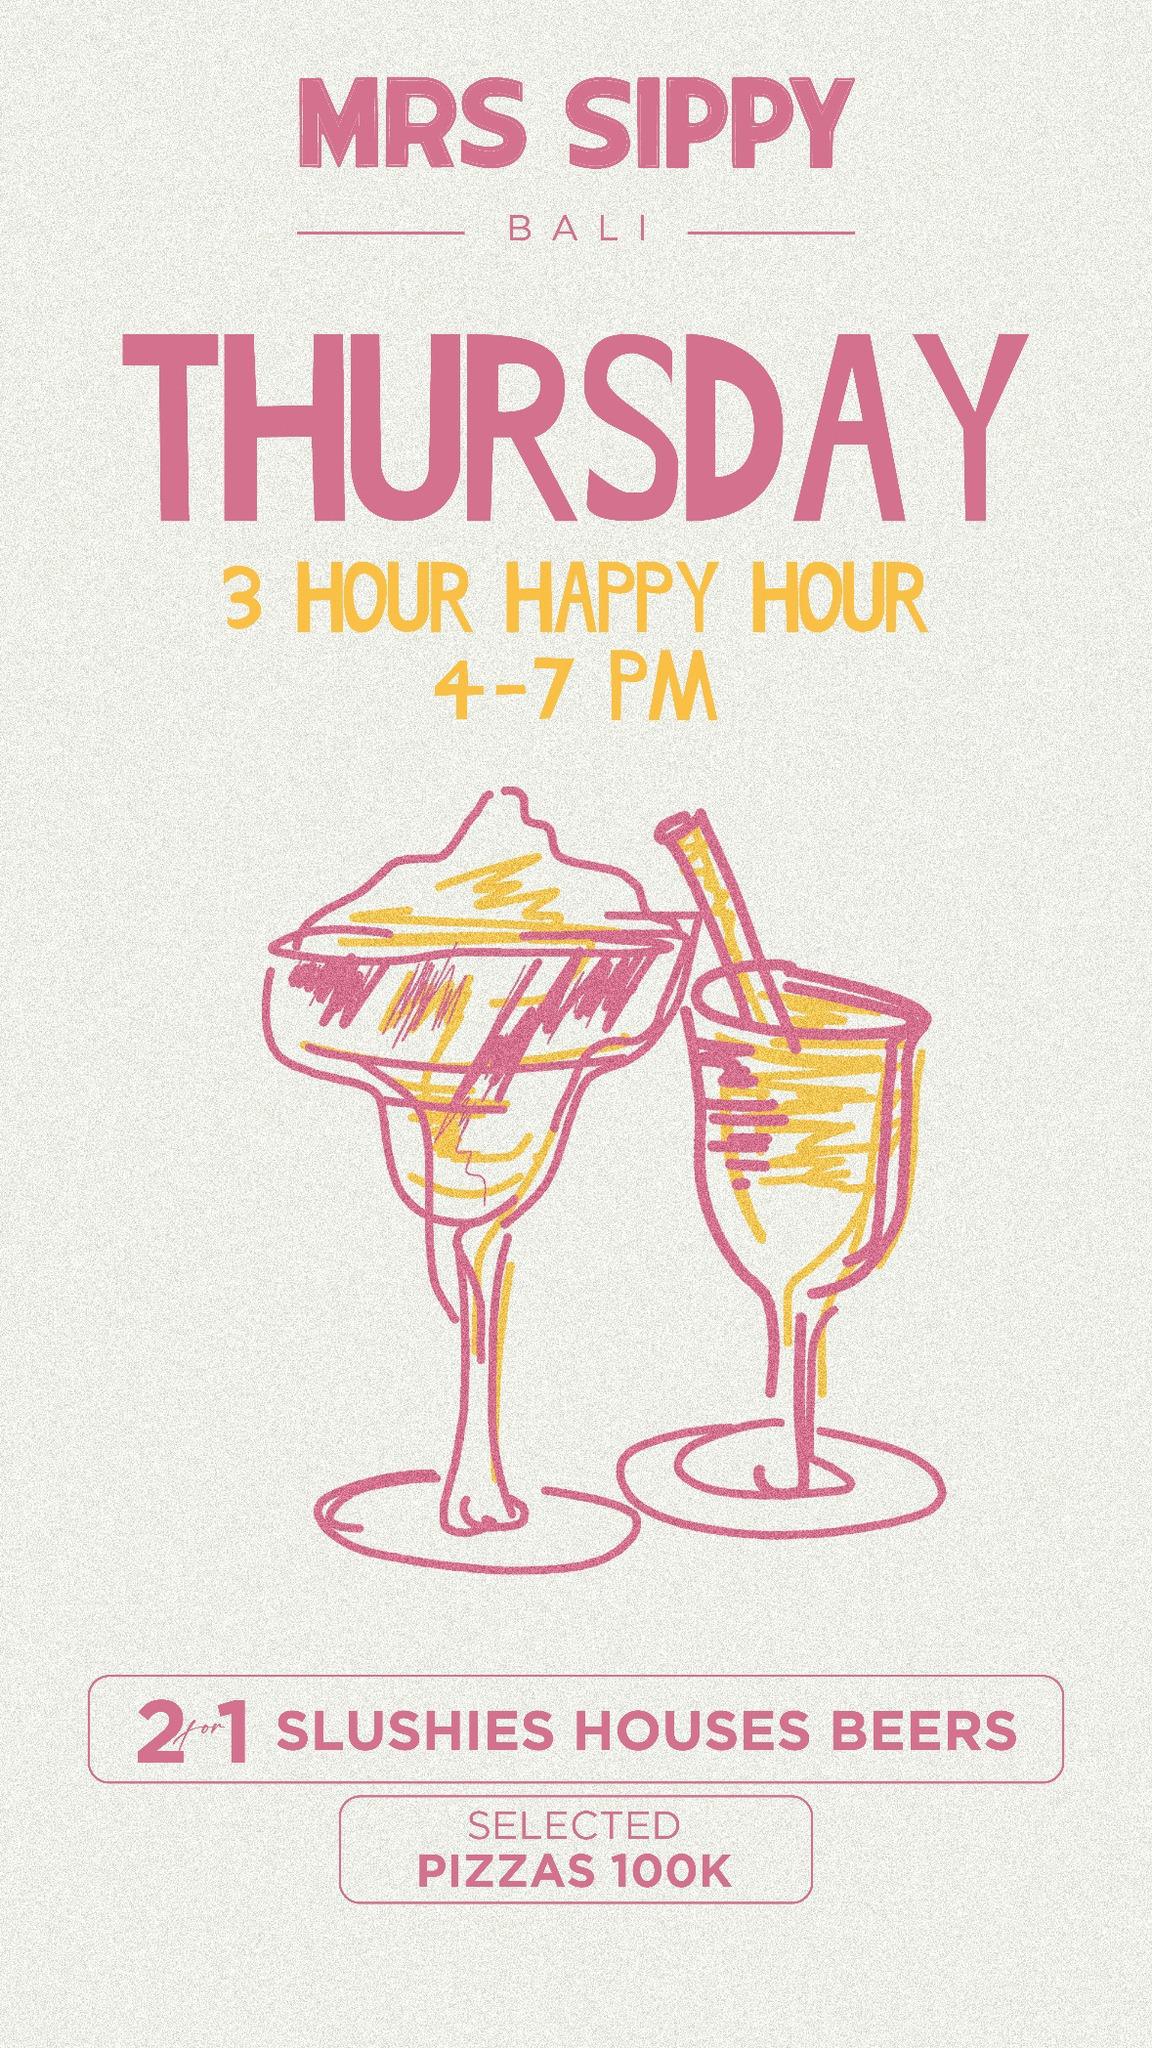 Thursday Happy Hour at Mrs Sippy Bali, 4-7pm